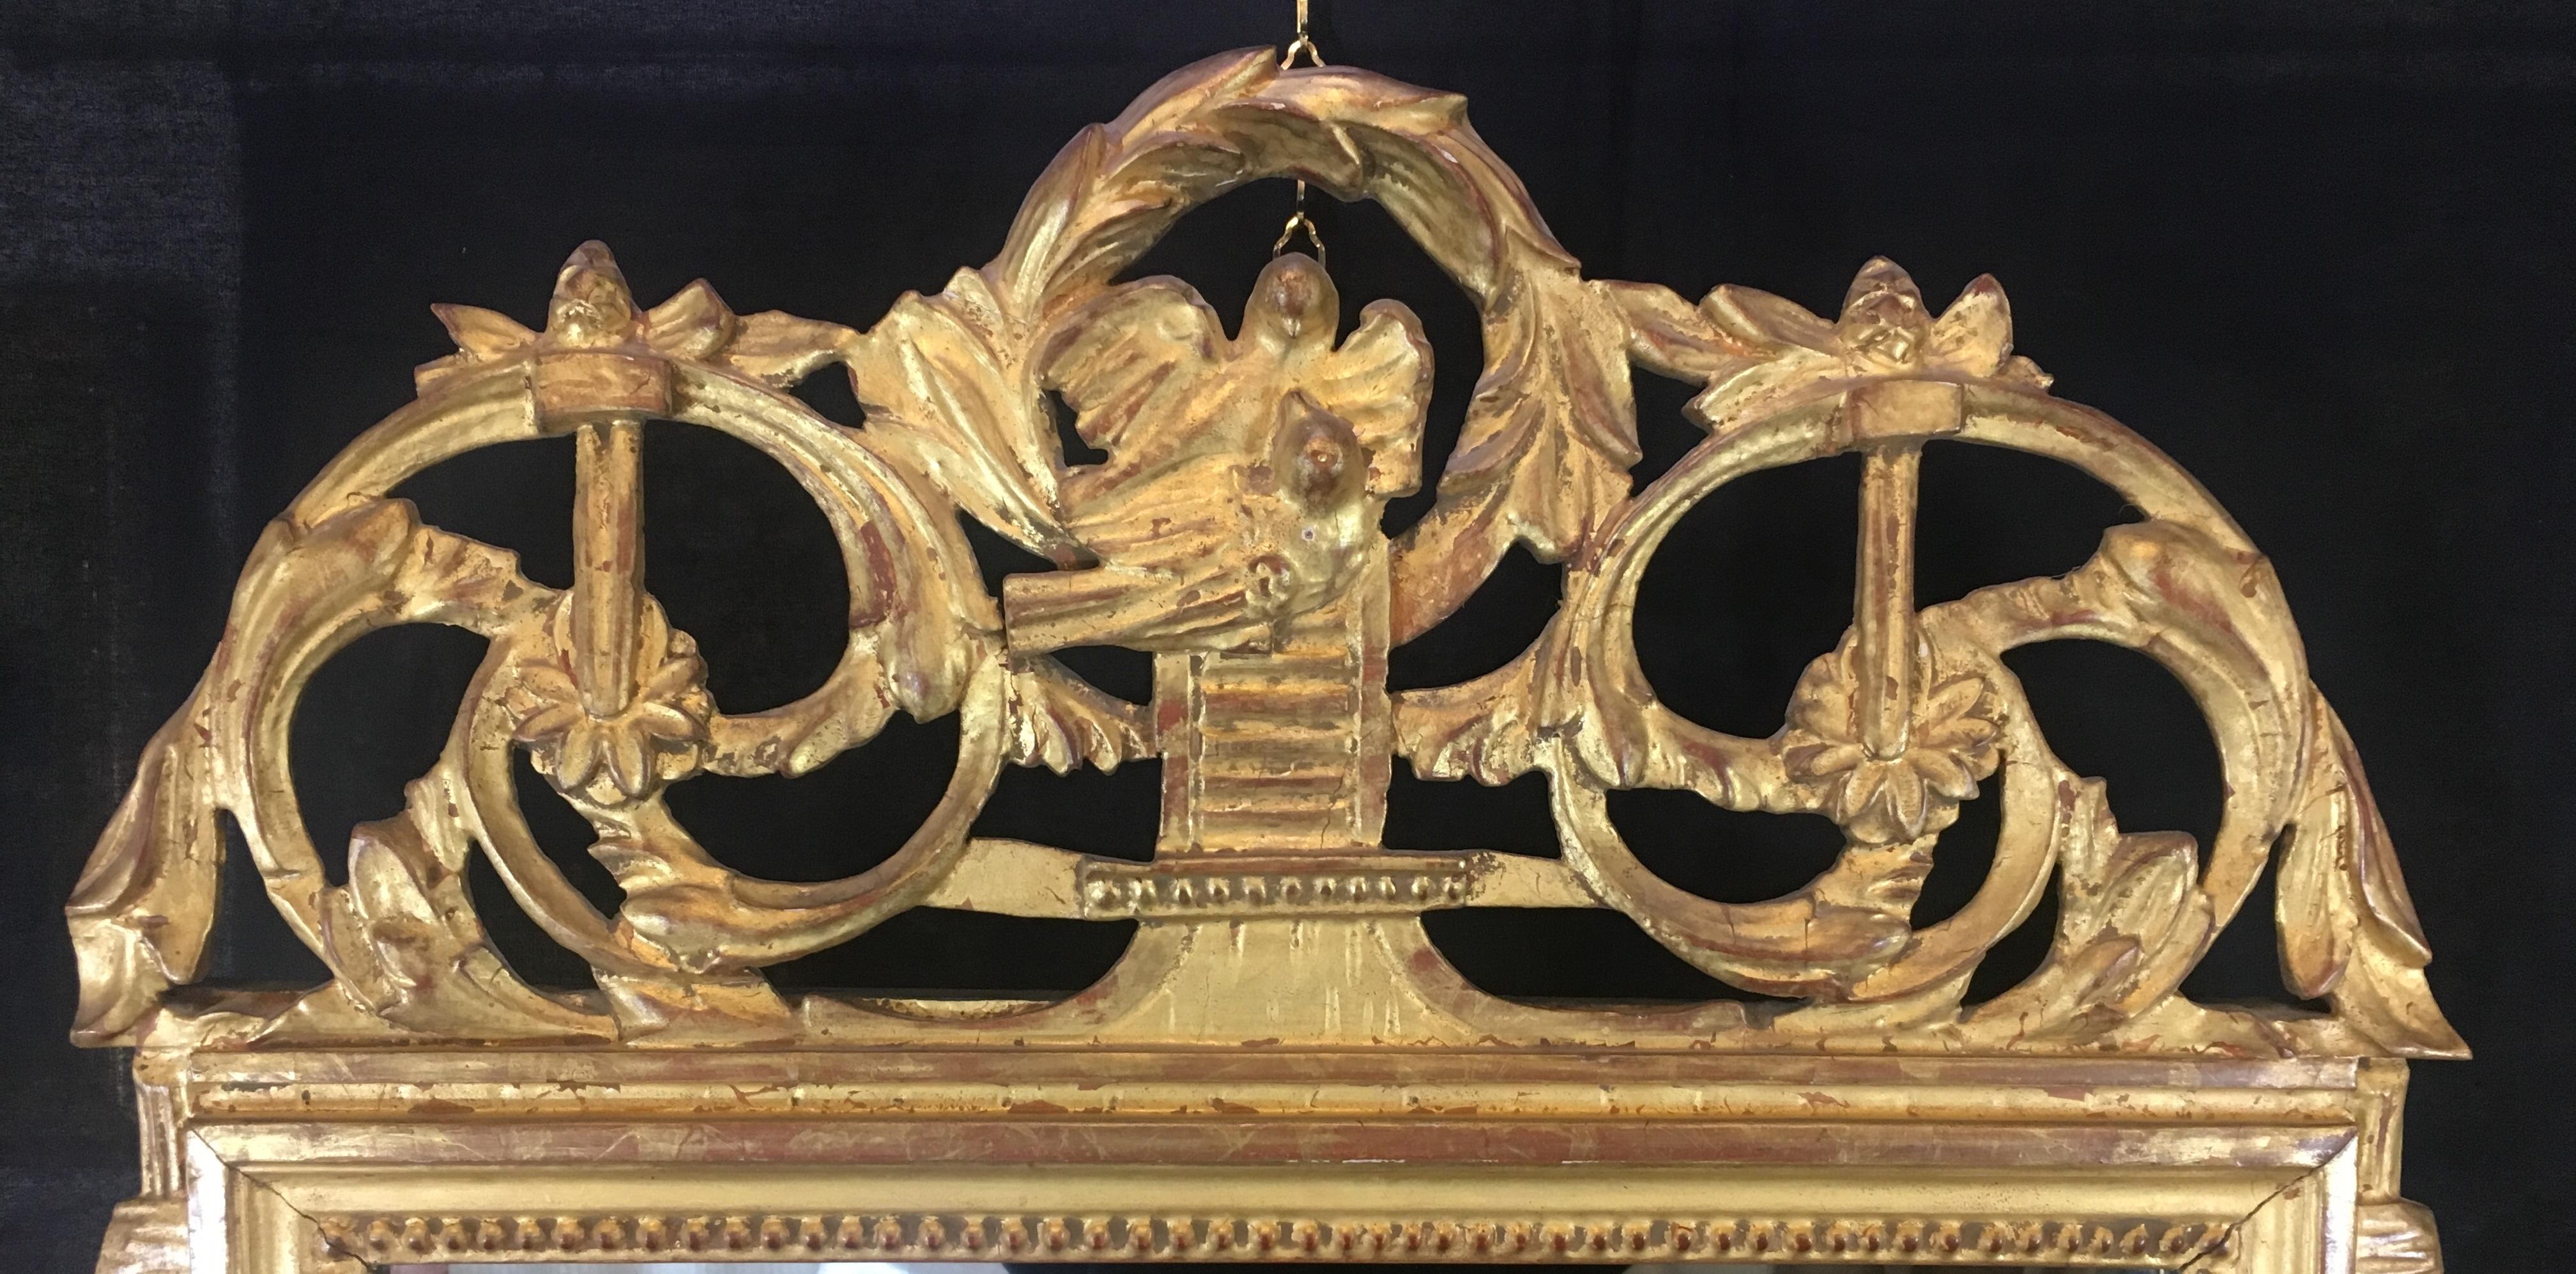 French Louis XVI style gilt wall mirror with beautiful hand carved details and wreath pediment top.
 
This mirror is very decorative and would enhance any wall or mantle in a space you deem appropriate.